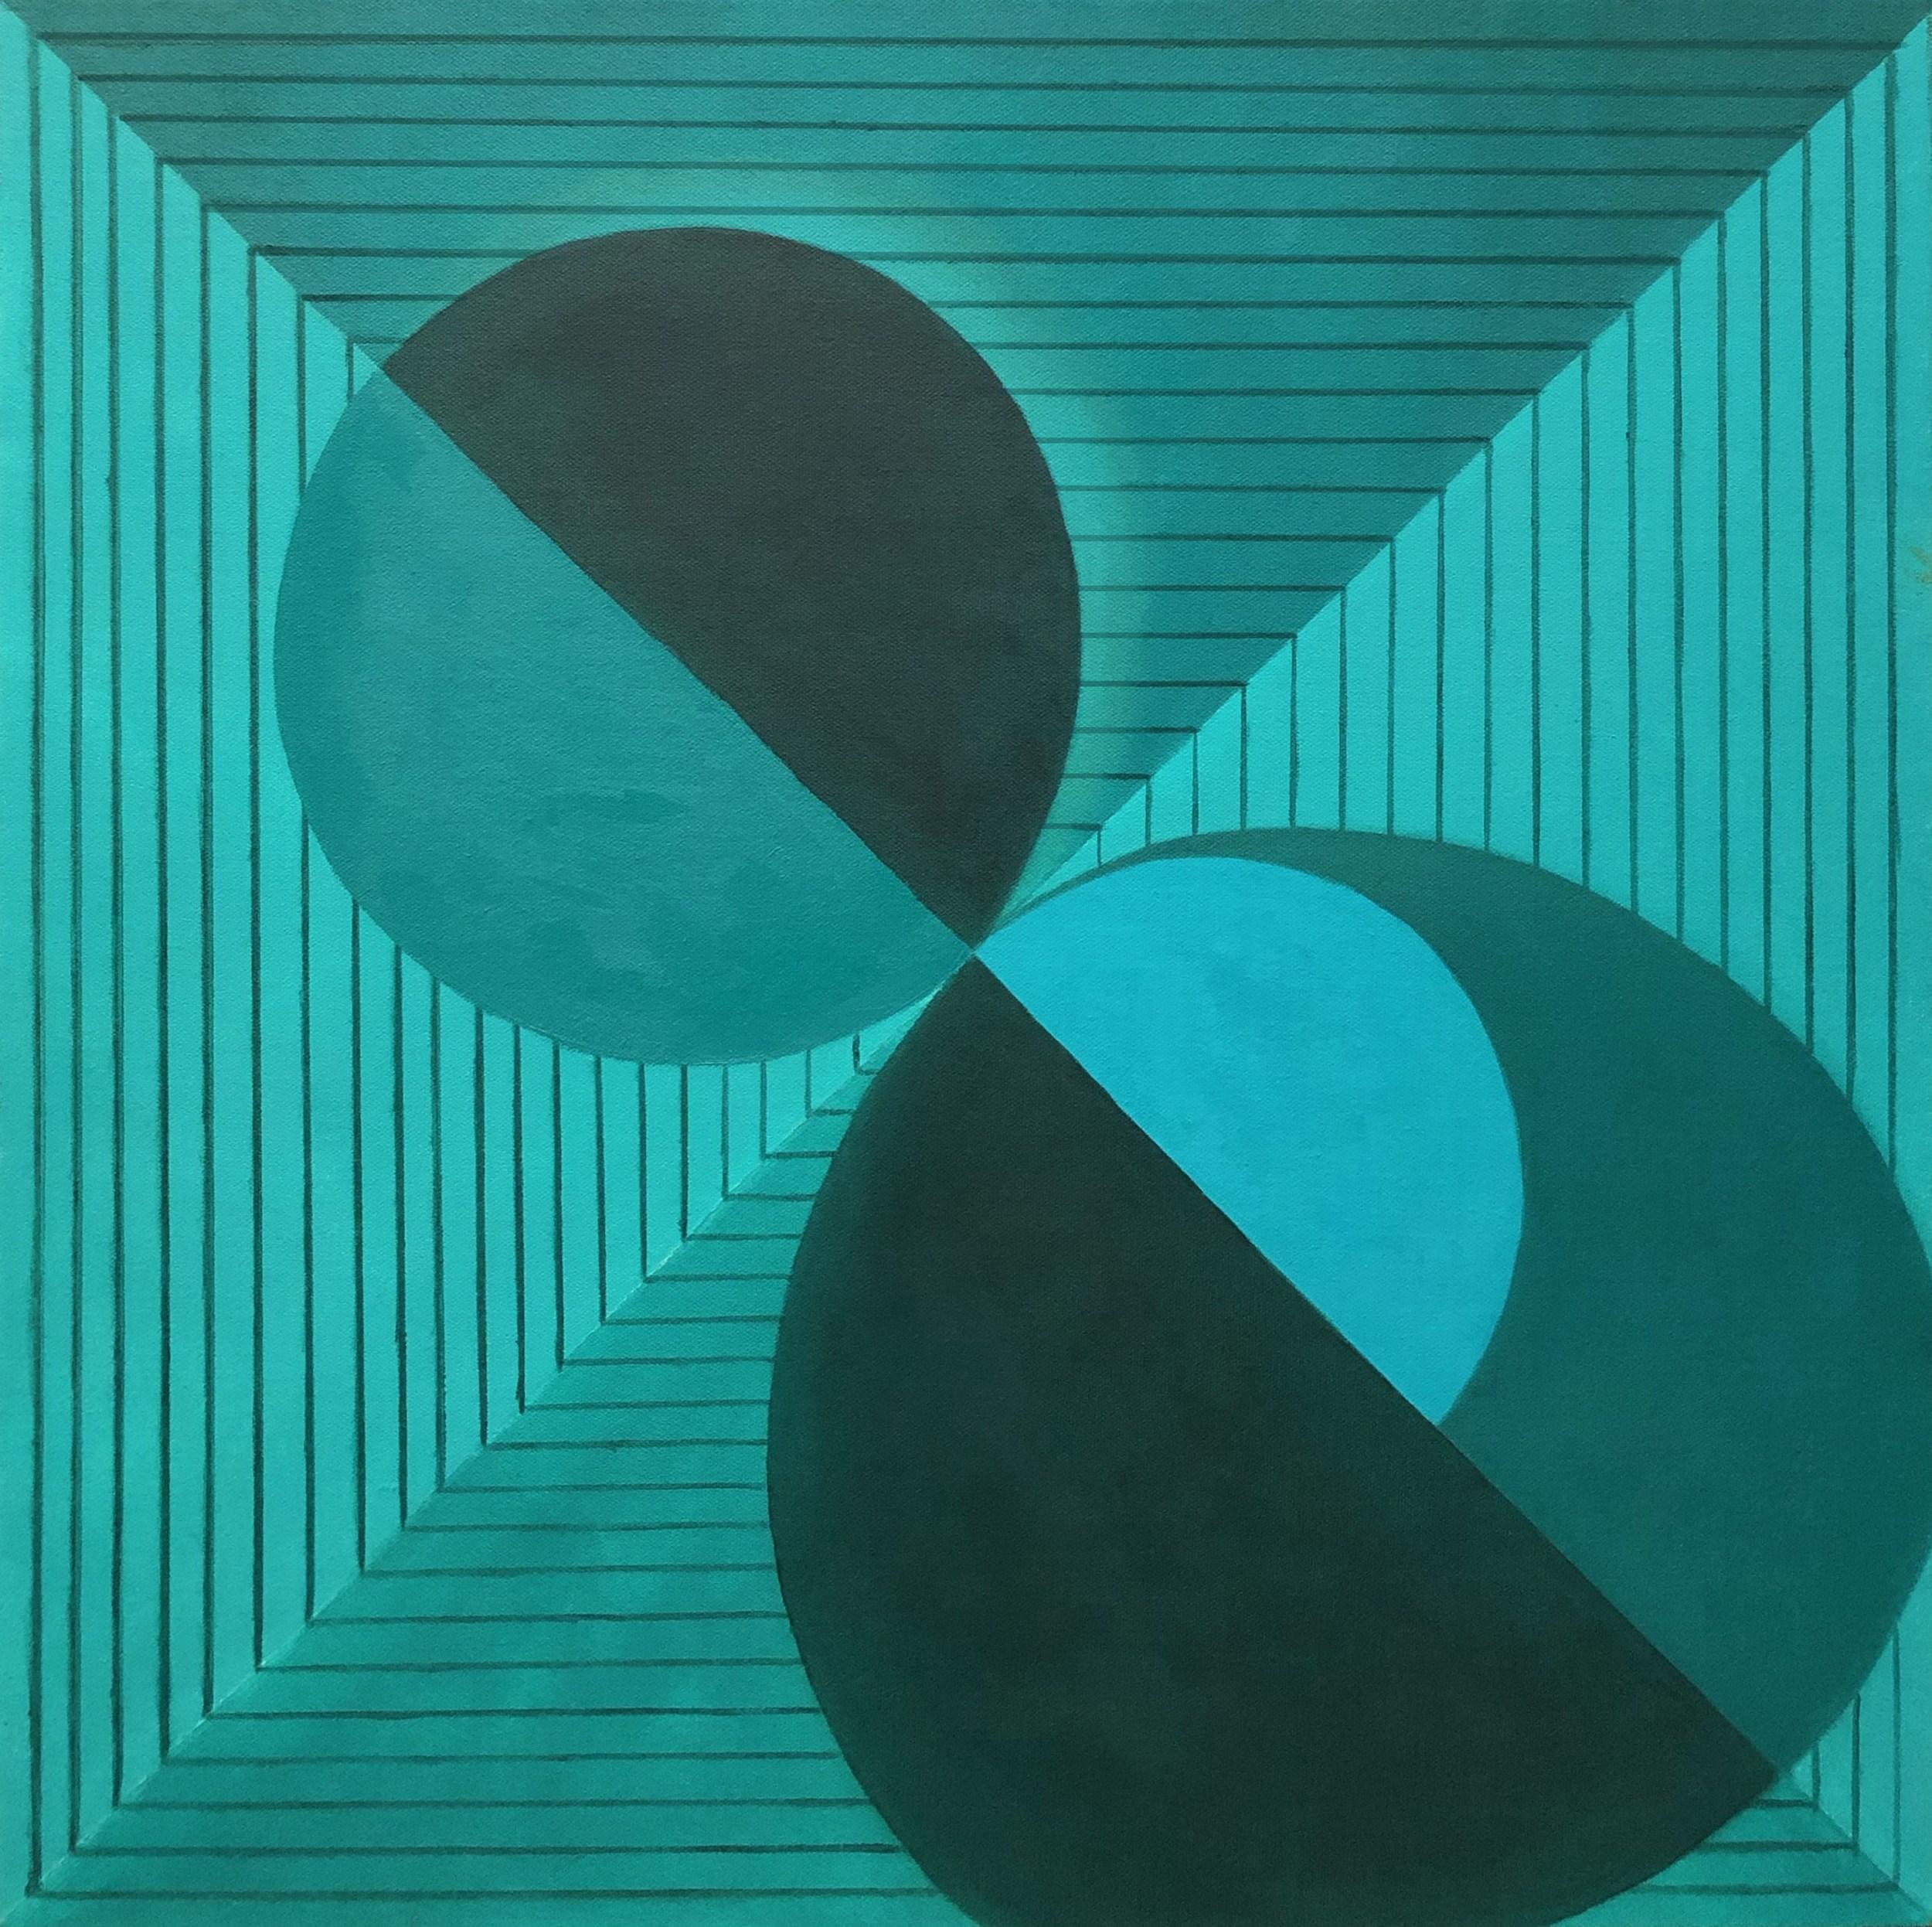 Tandem Lives In a Parallel Existence (Geometric Abstraction, Minimalism, Albers)